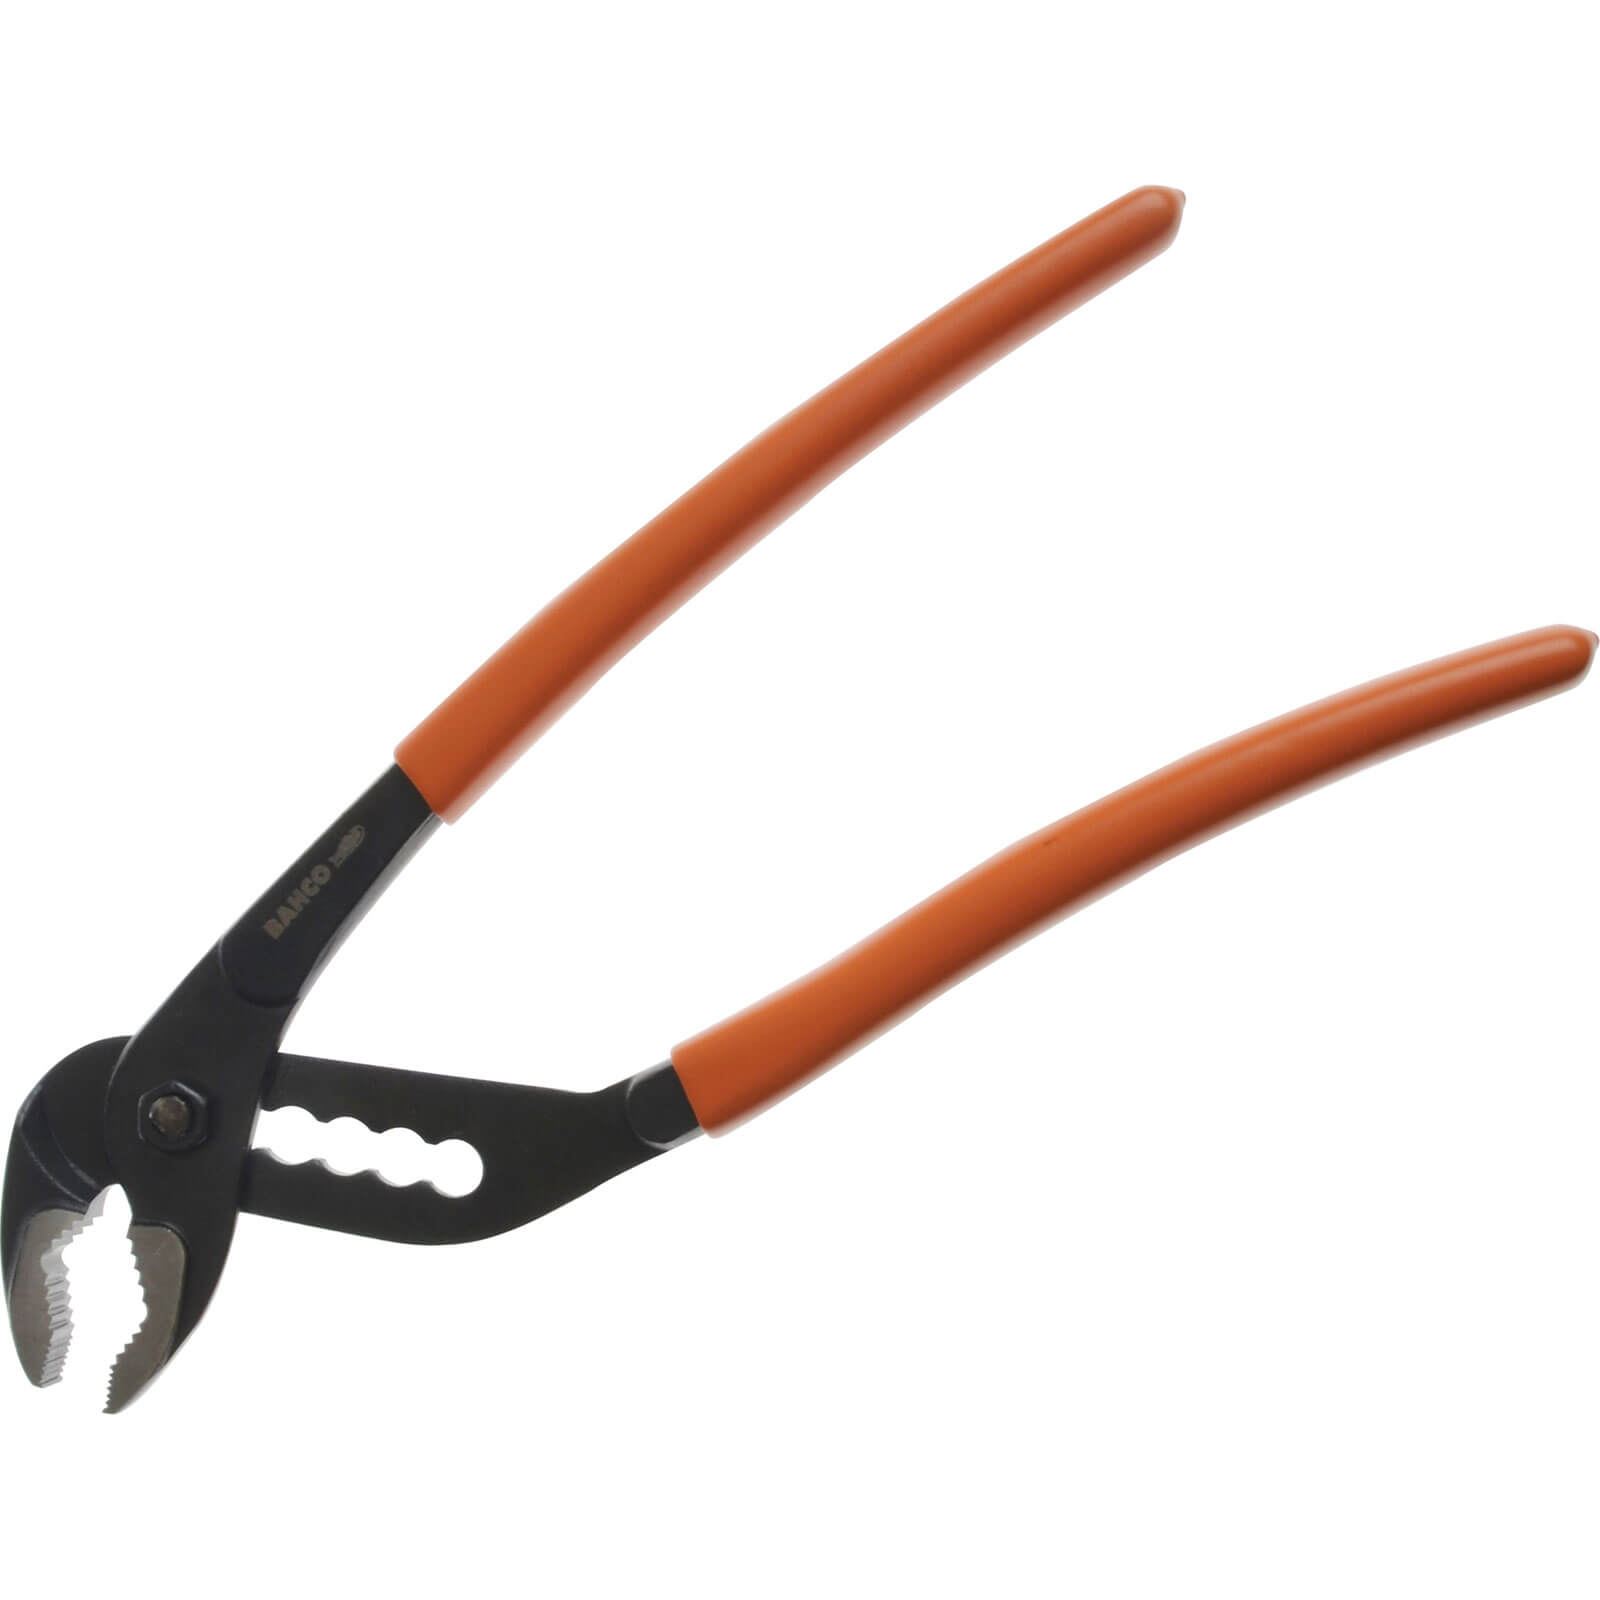 Bahco 221D Slip Joint Pliers 300mm